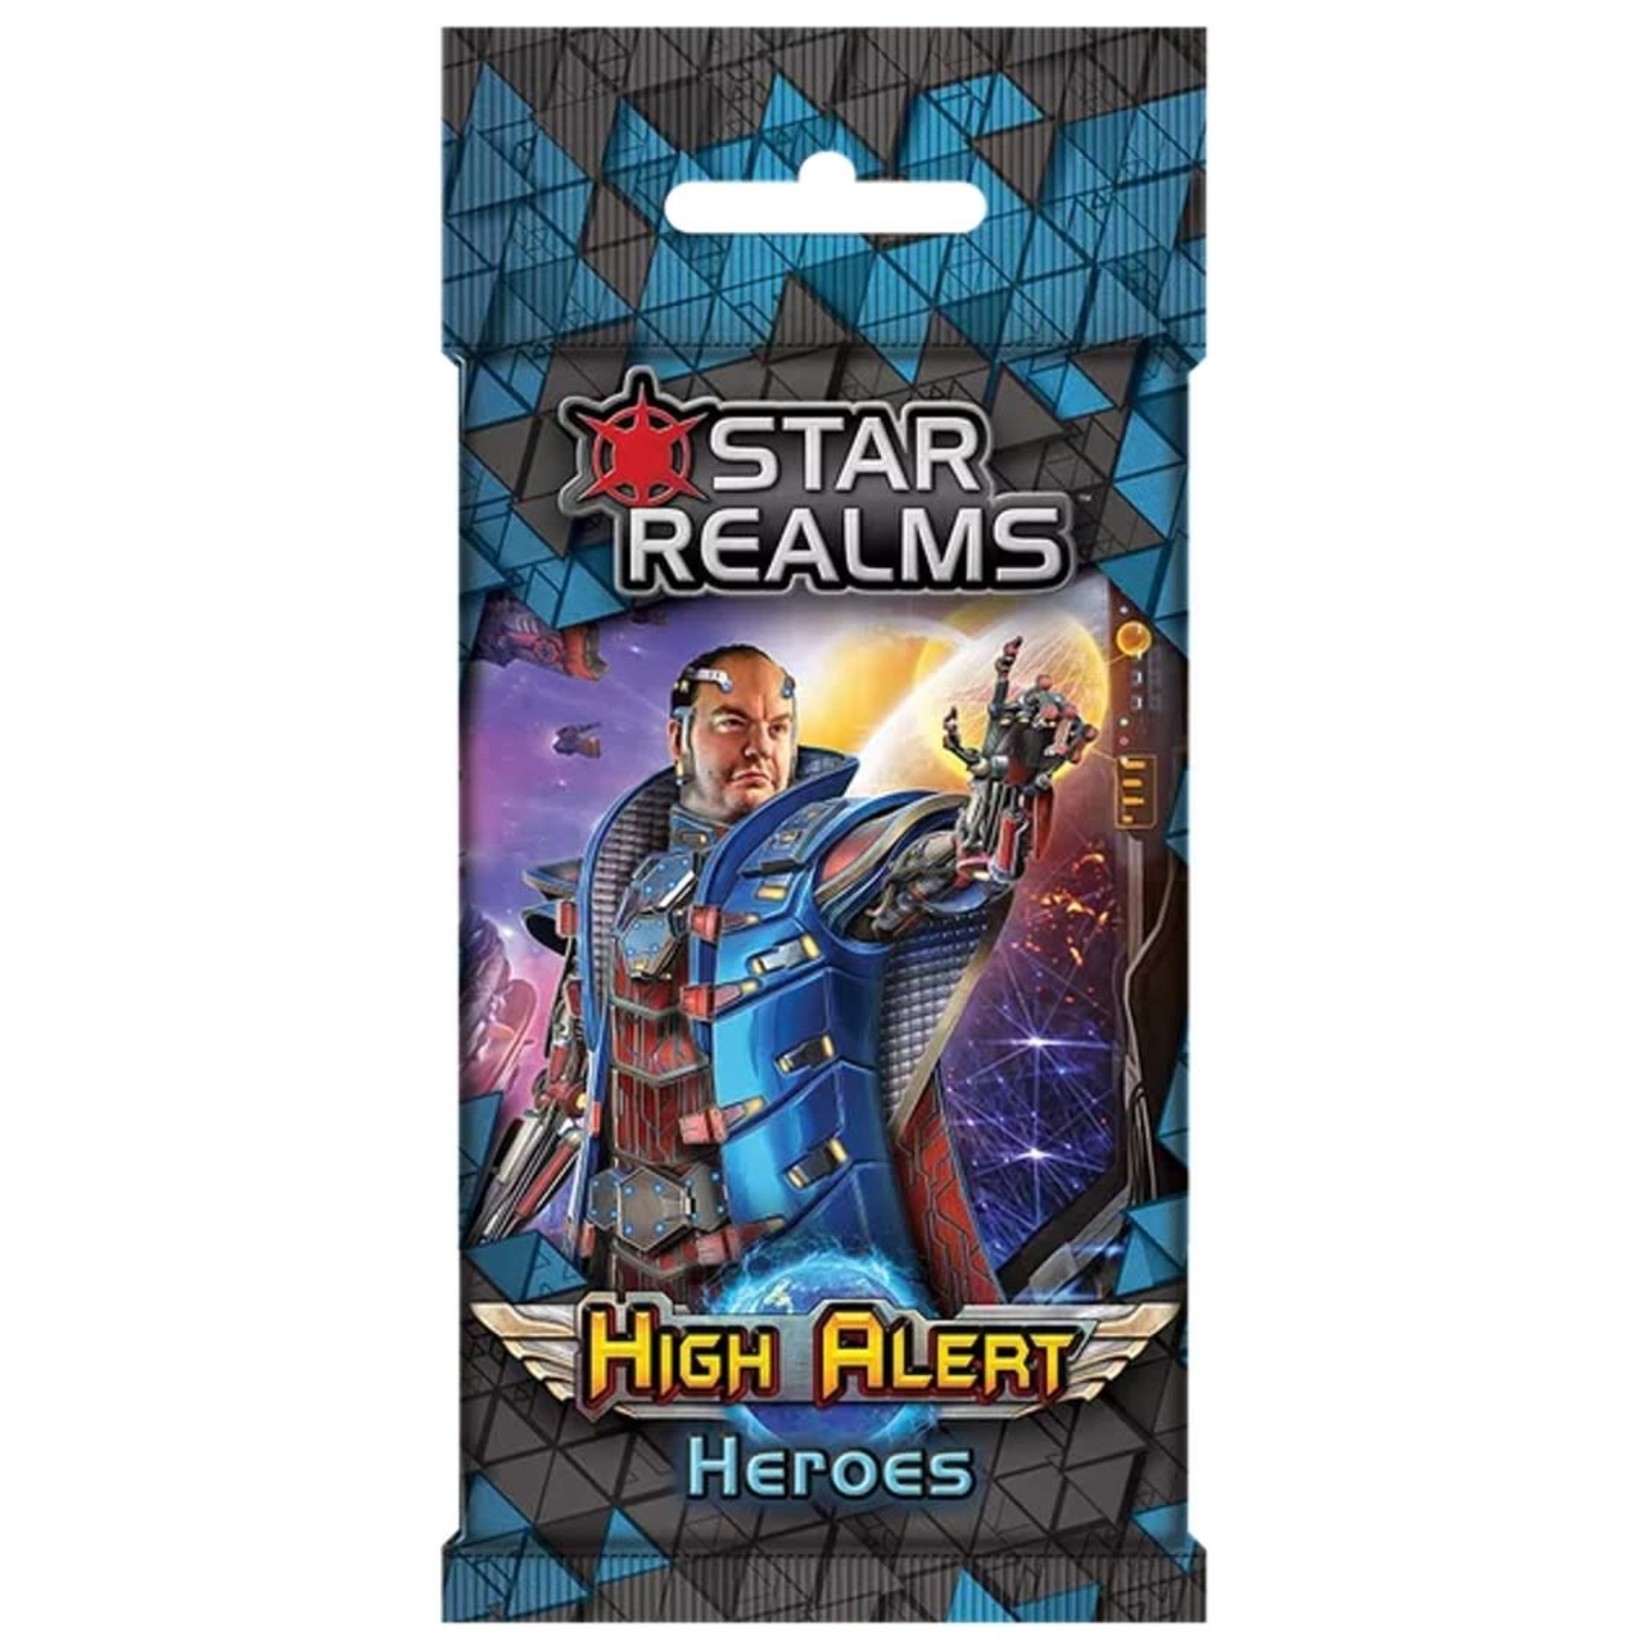 Wise Wizard Games Star Realms High Alert Heroes Expansion